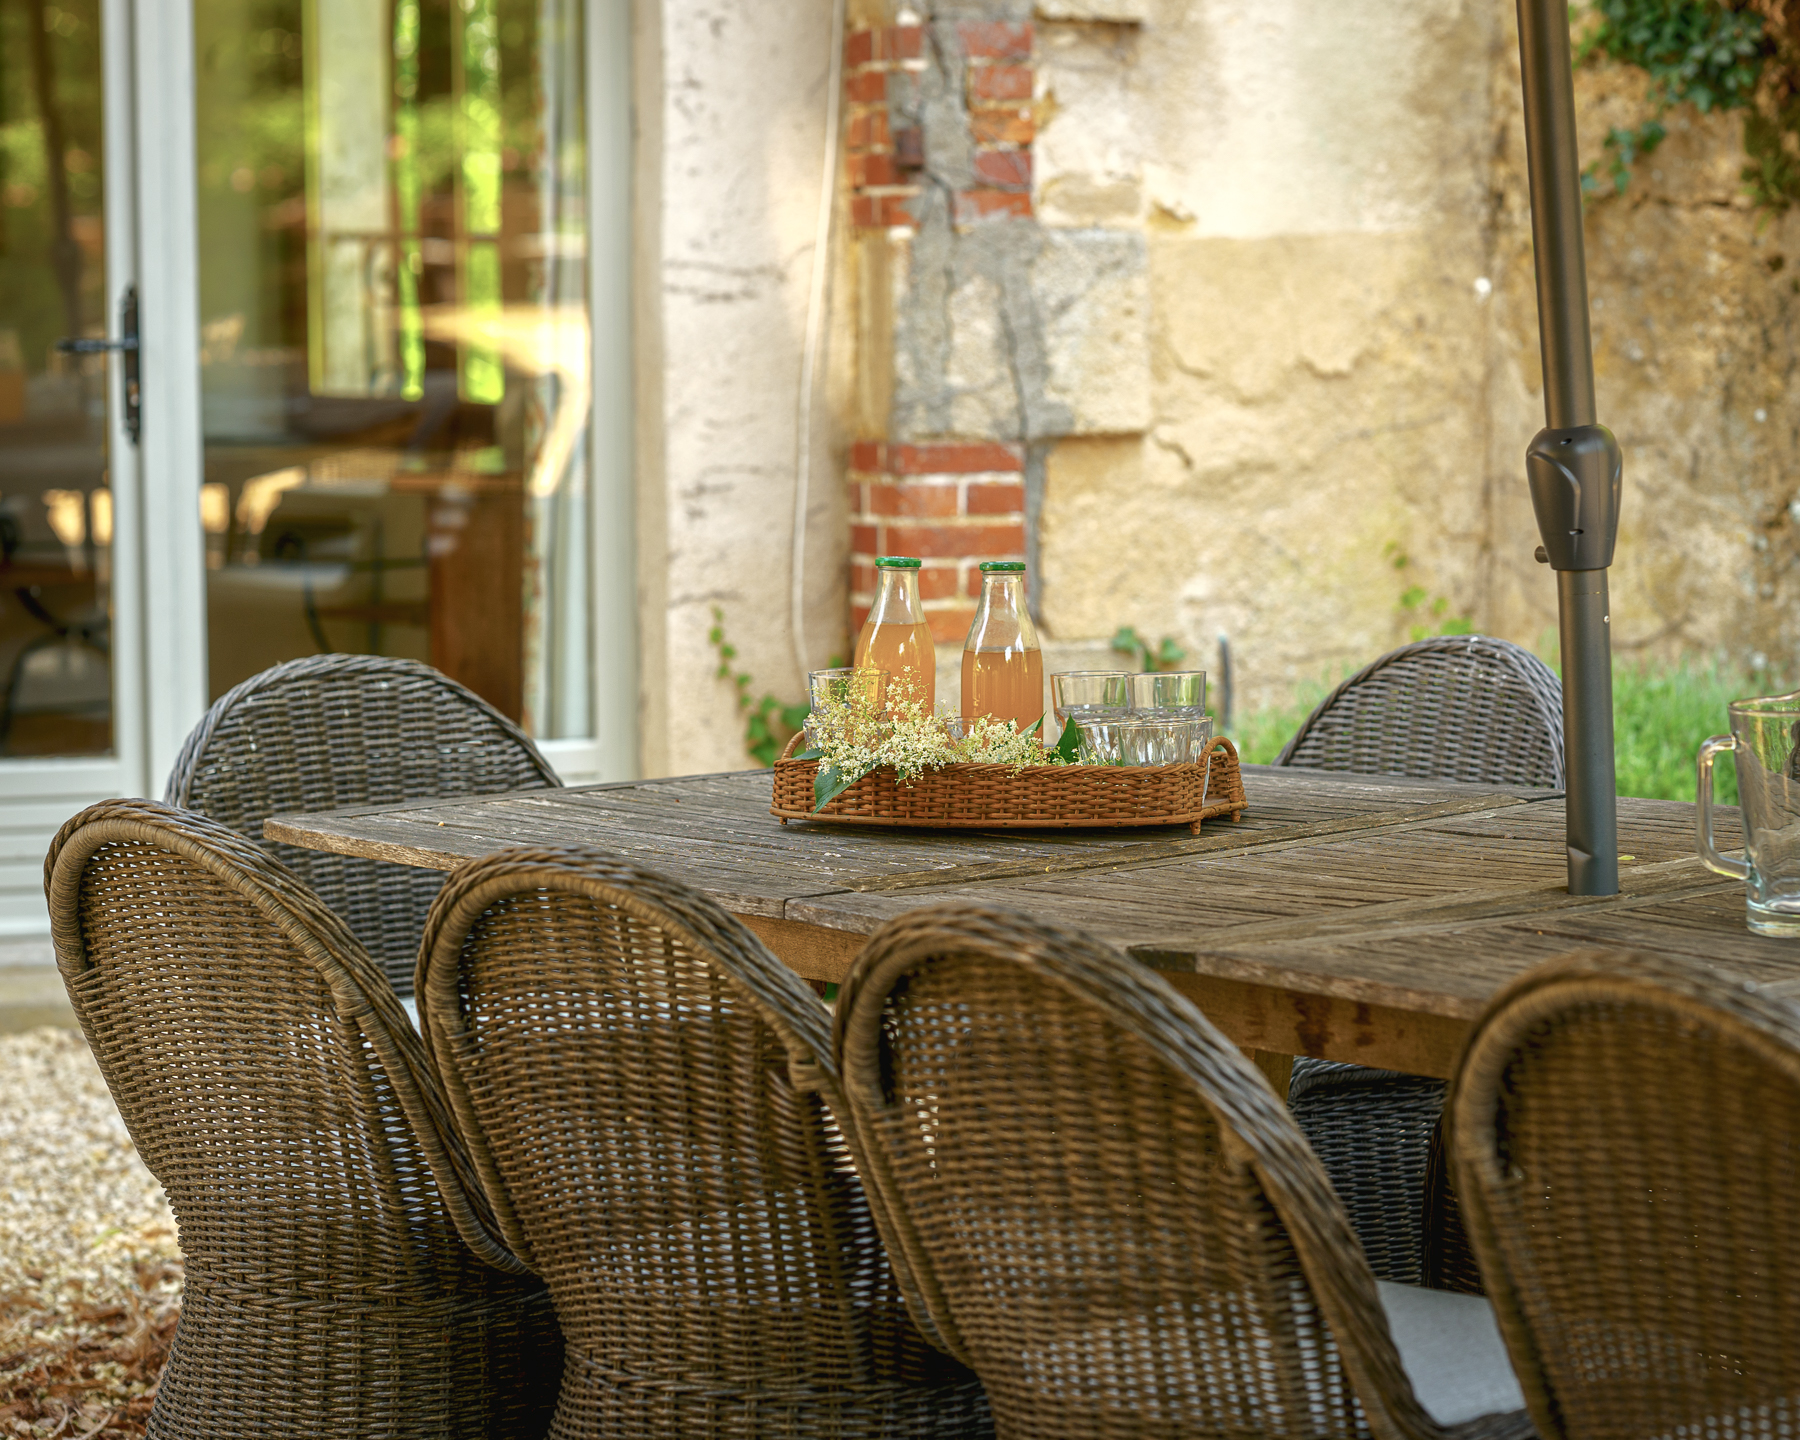 Outdoor Dining at back of Coach House at Chateau de la Vigne